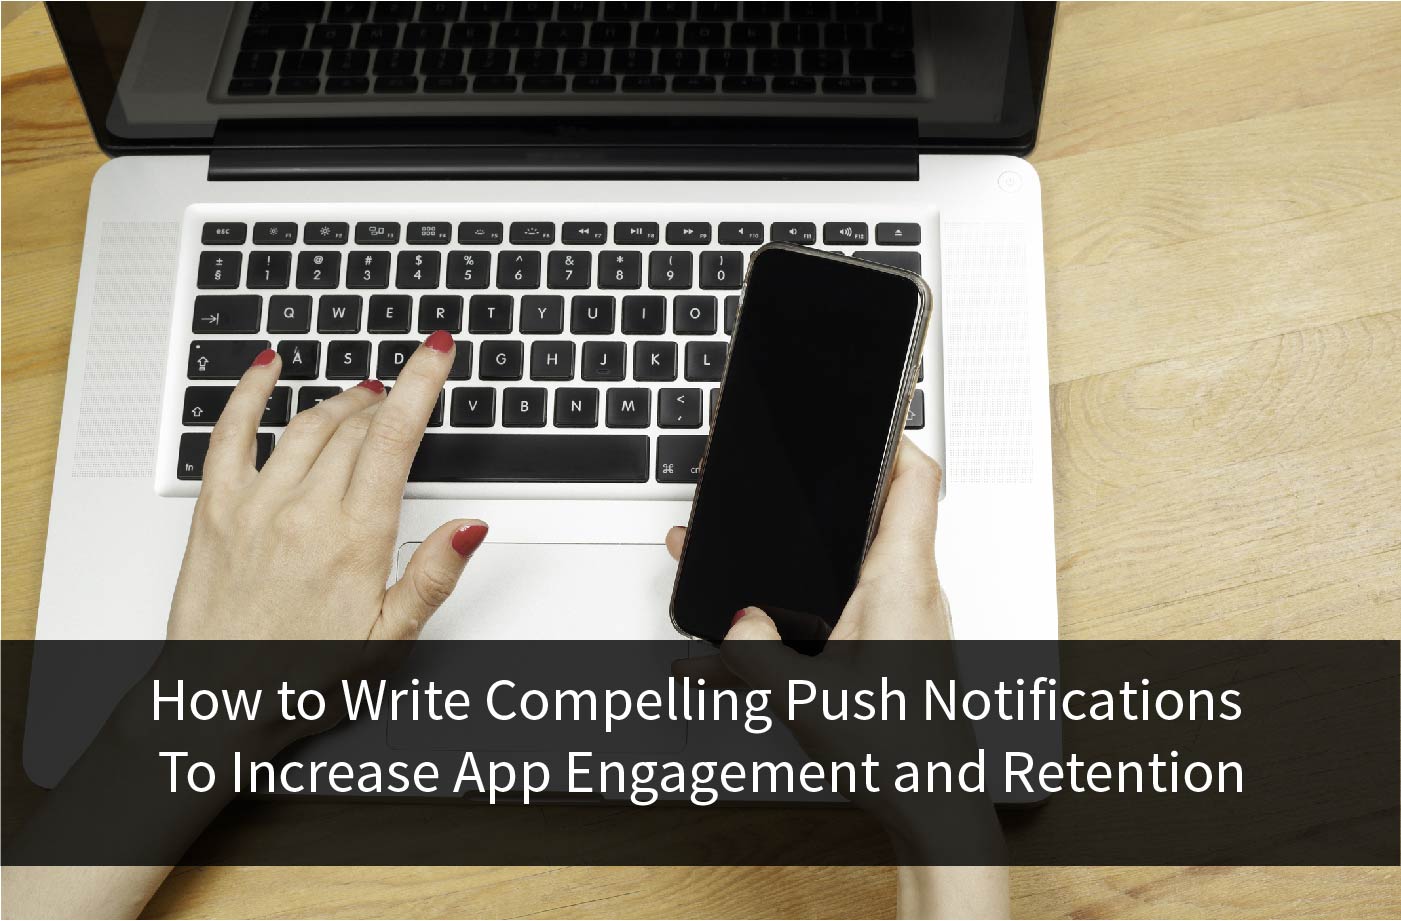 The 10 Best Push Notification Tools To Boost App Retention